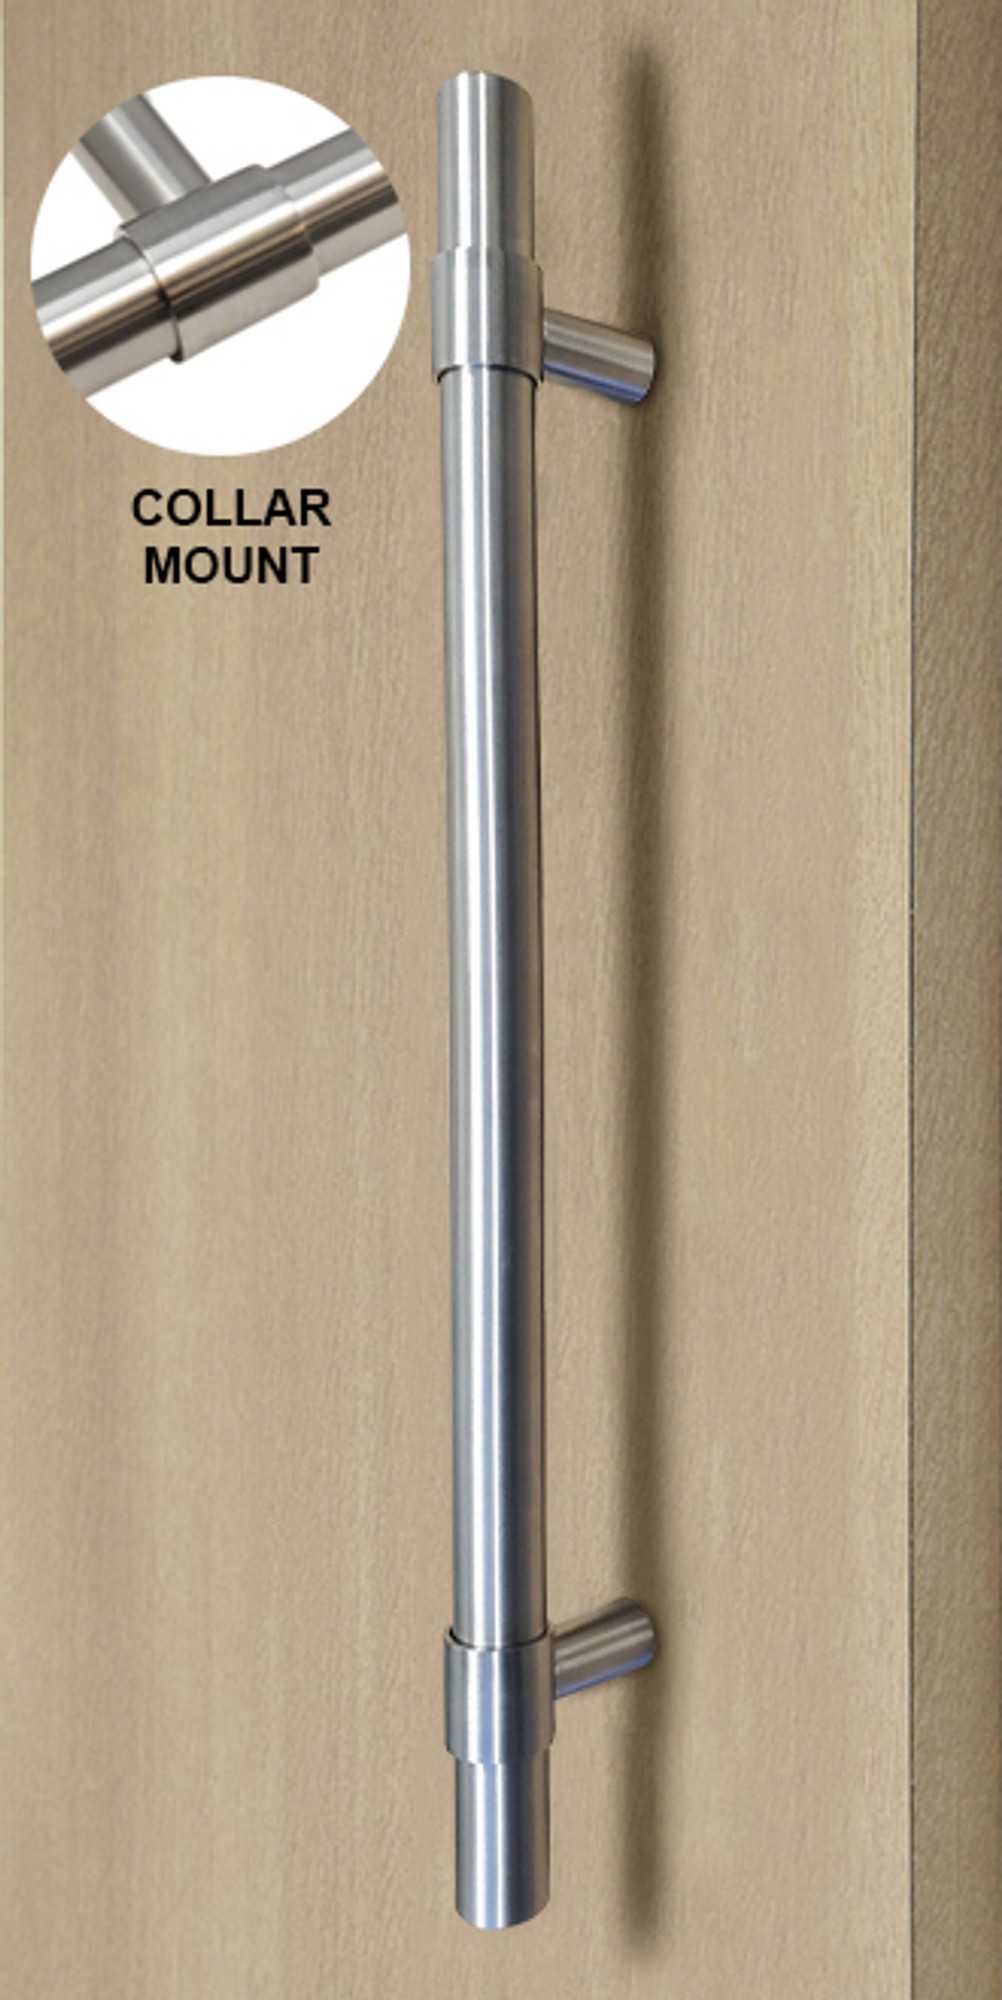 Pro-Line Series: Ladder Pull Handle with Collar Mounting Posts - Back-to-Back, Brushed Satin US32D/630 Finish, 304 Grade Stainless Steel Alloy